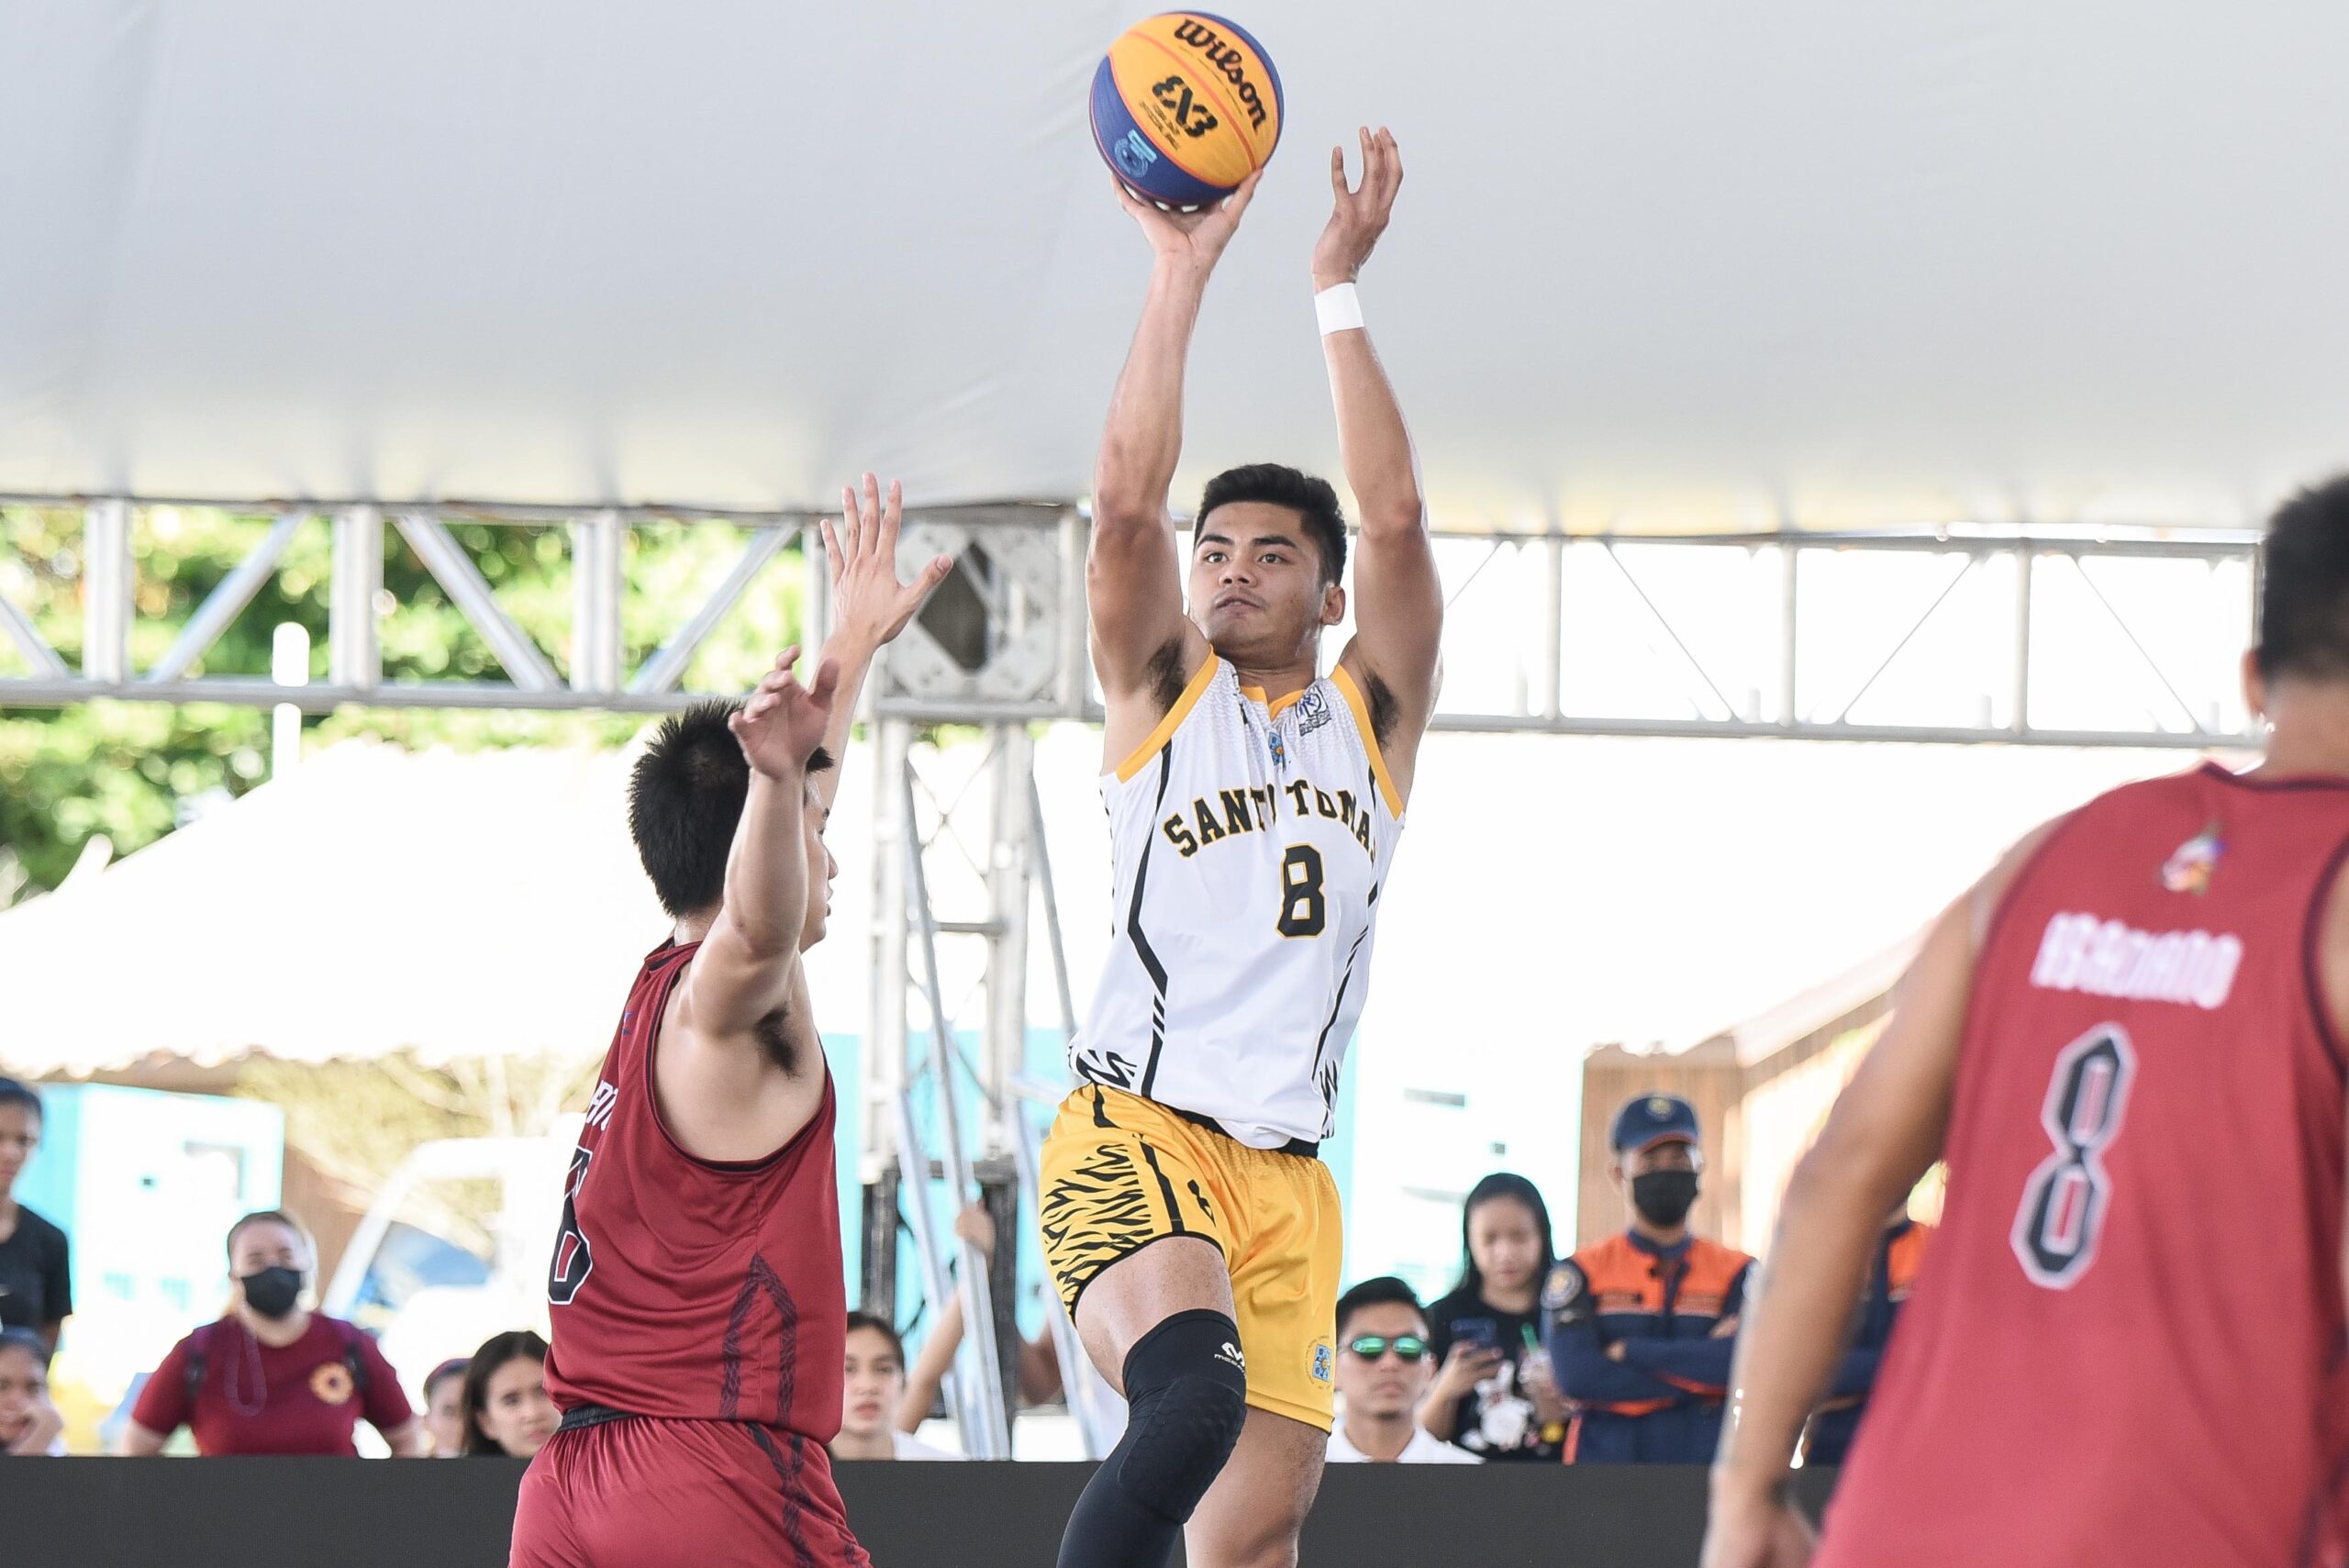 UAAP-Season-84-3x3-Mens-UST-Sherwin-Concepcion-1-1-scaled UAAP 84: Concepcion winner caps UST stunner over La Salle to rule men's 3x3 3x3 Basketball DLSU News NU UAAP UP UST  - philippine sports news